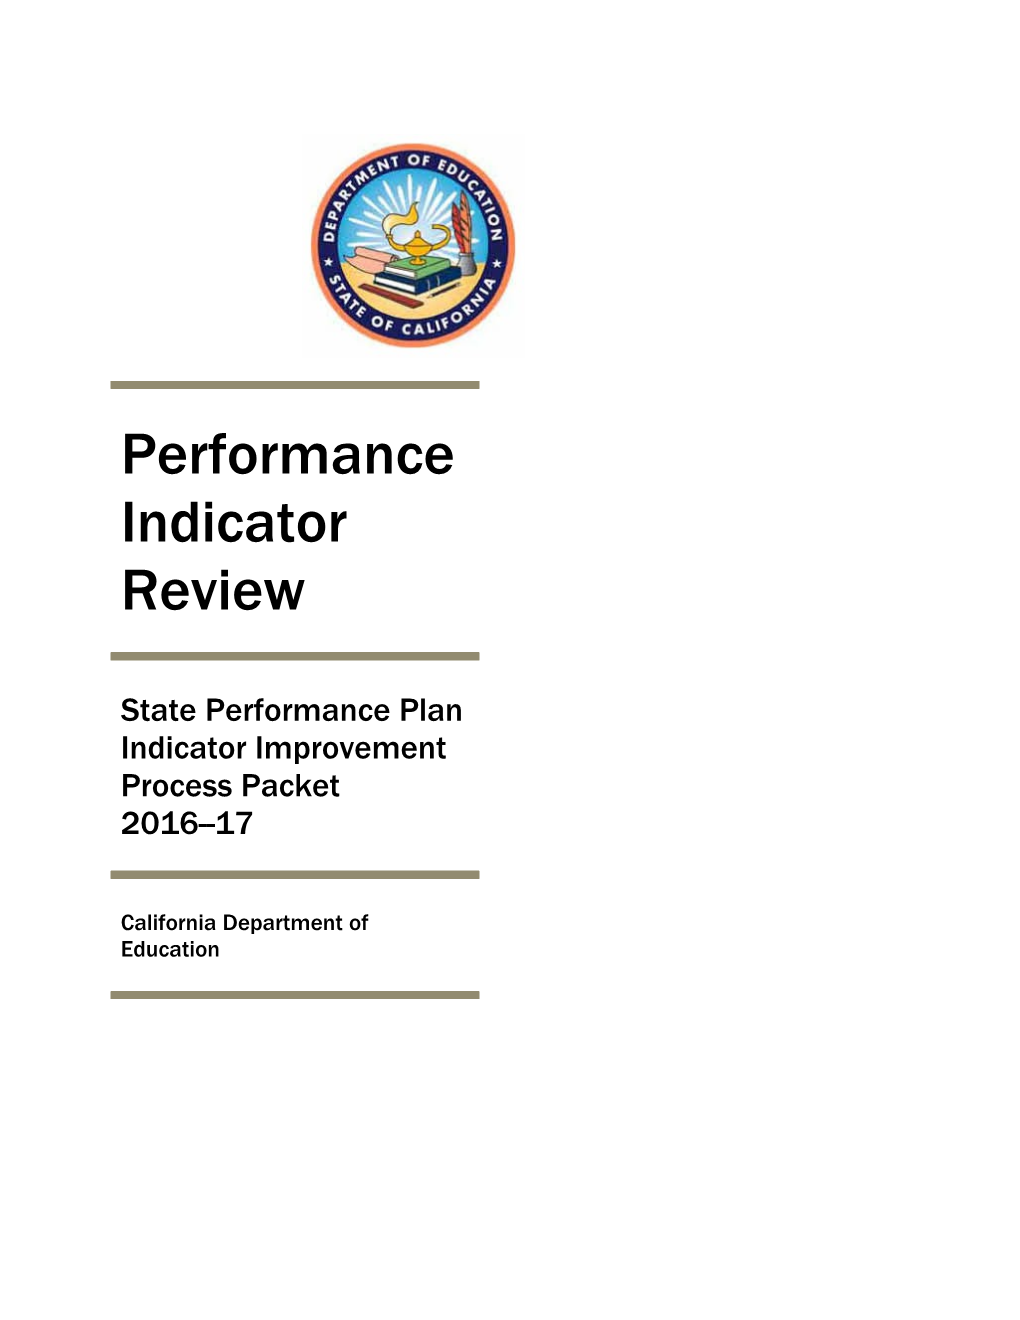 Performance Indicator Review